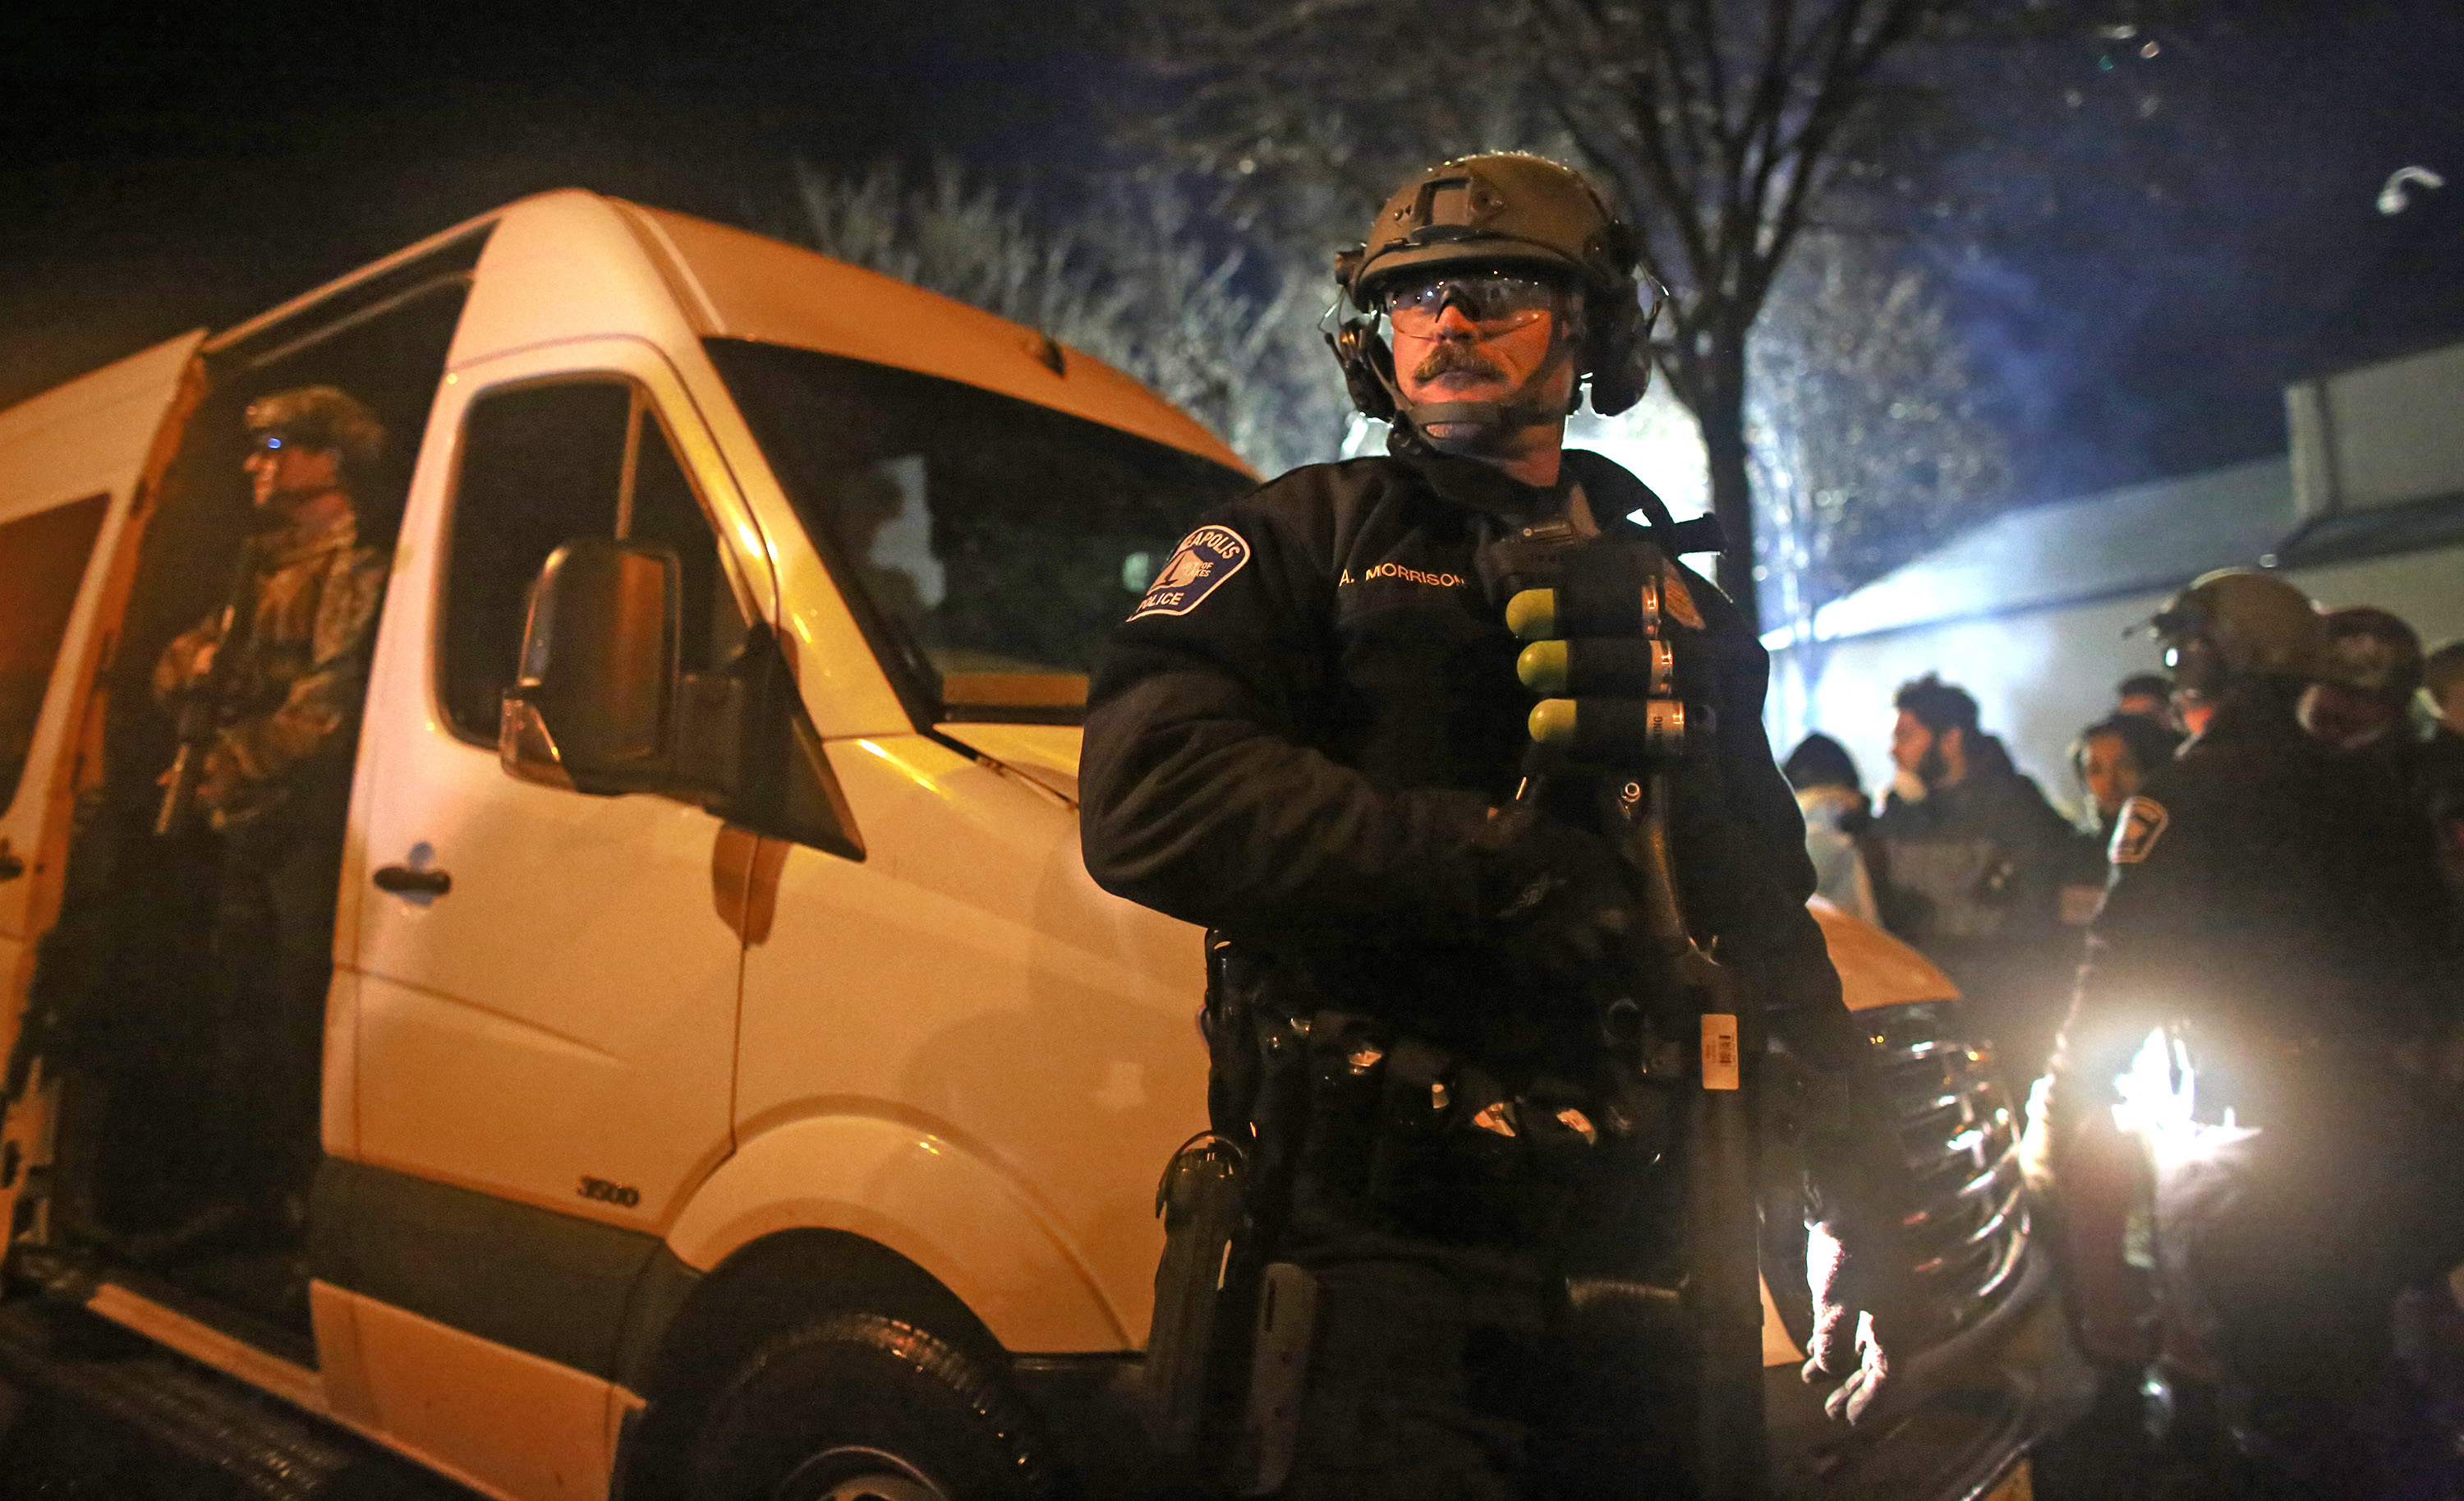 Police in riot gear watched the crowd of protesters after they drove near the front of the Minneapolis Fourth Precinct ] (KYNDELL HARKNESS/STAR TRIBUNE) kyndell.harkness@startribune.com Black Lives Matter protested in front of Minneapolis Fourth Precinct in Minneapolis Min., Wednesday November 18, 2015. ORG XMIT: MIN1511182040500681